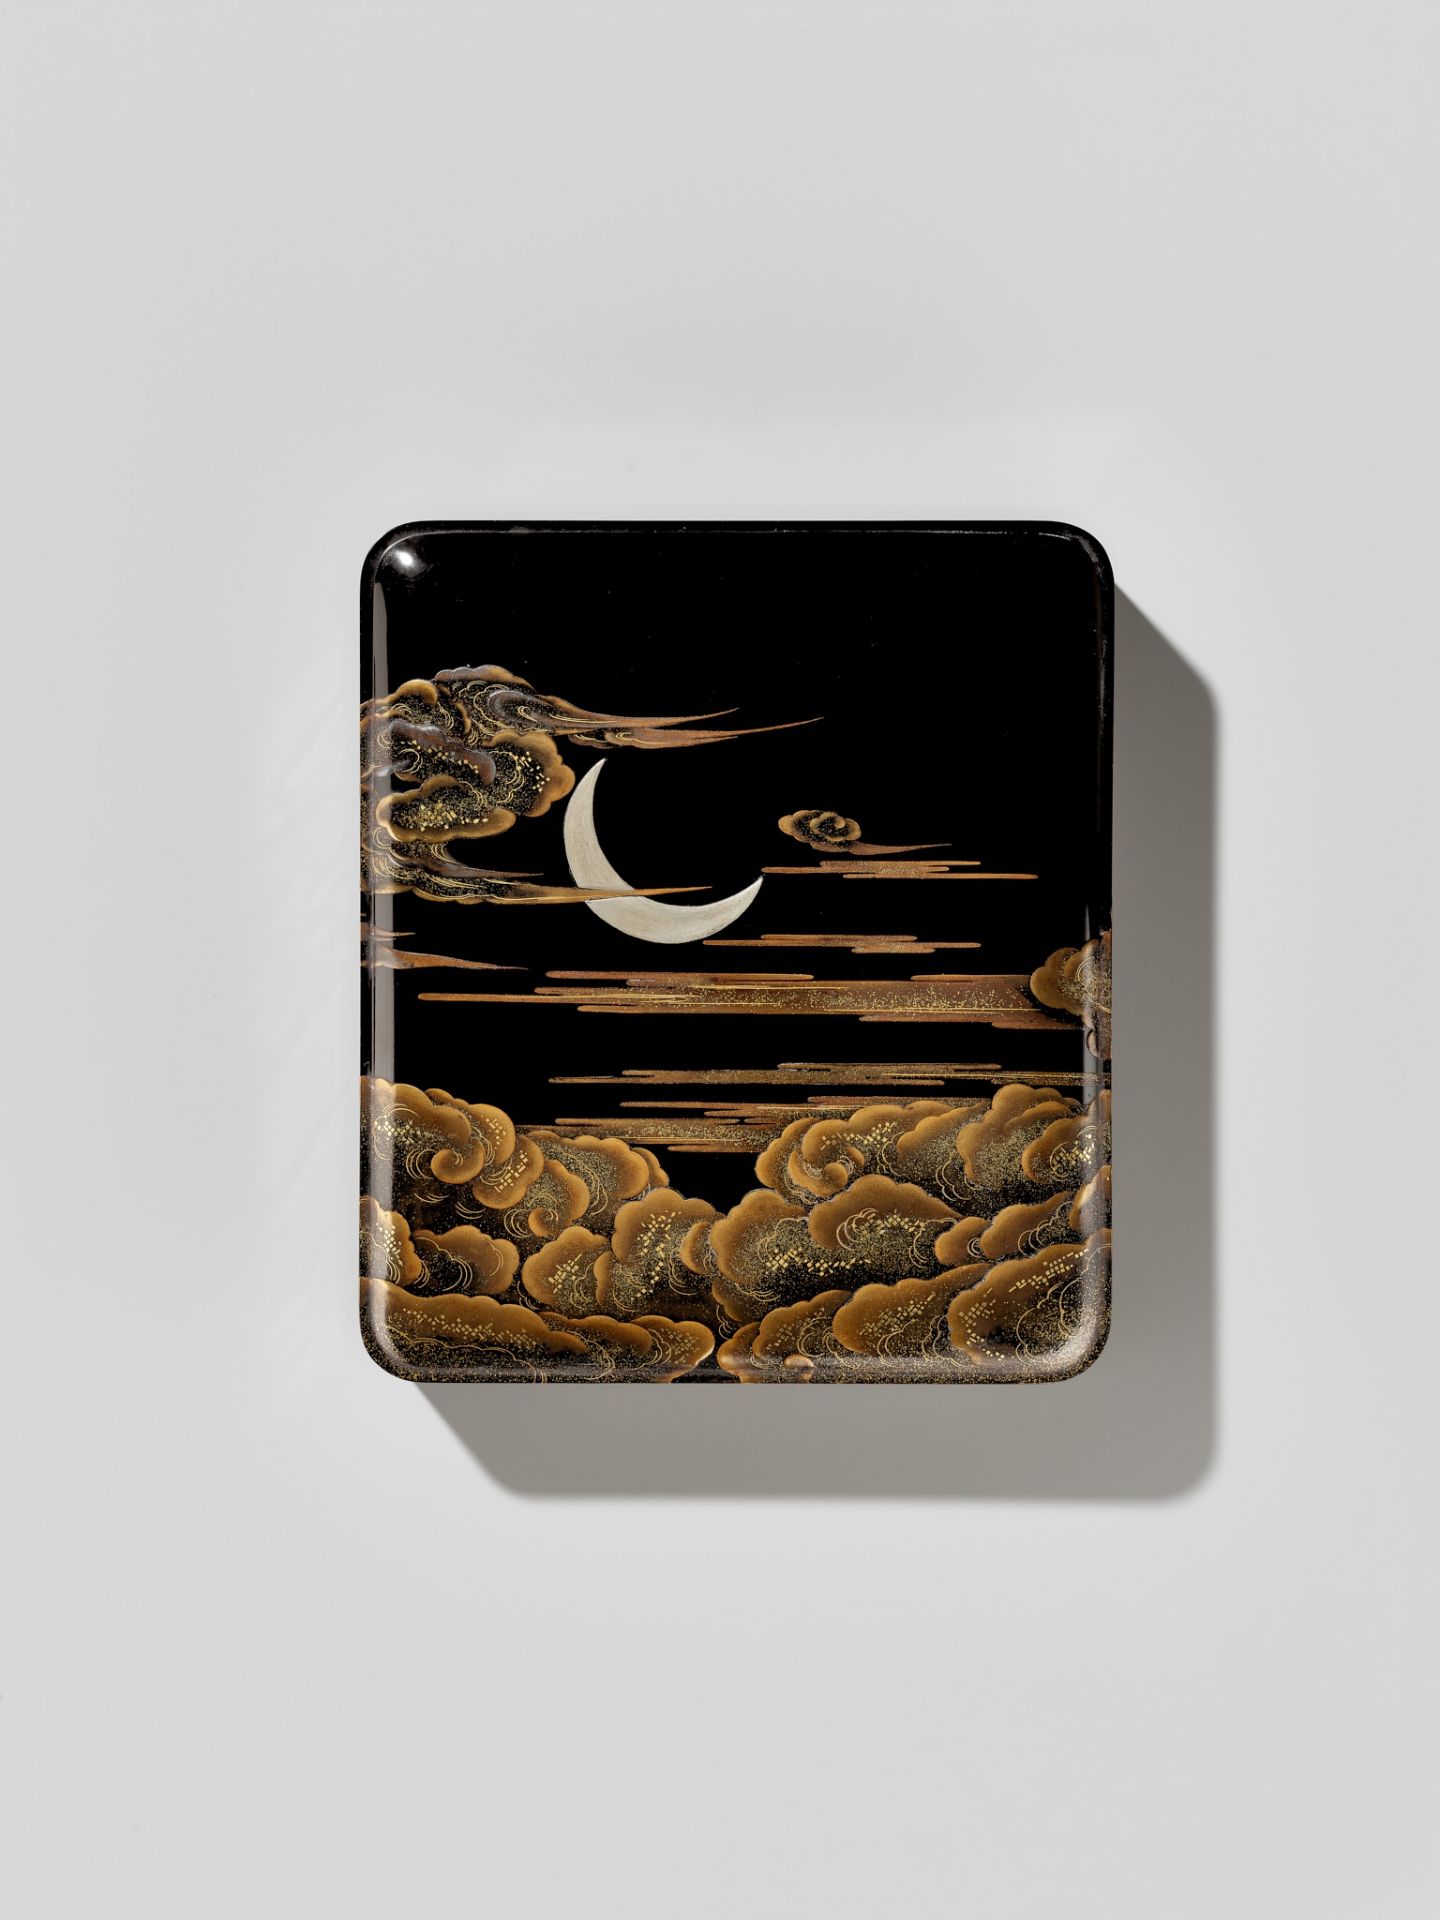 A MAGNIFICENT LACQUER WRITING SET WITH THE RISING SUN, CRESCENT MOON AND CLOUDS - Bild 3 aus 7